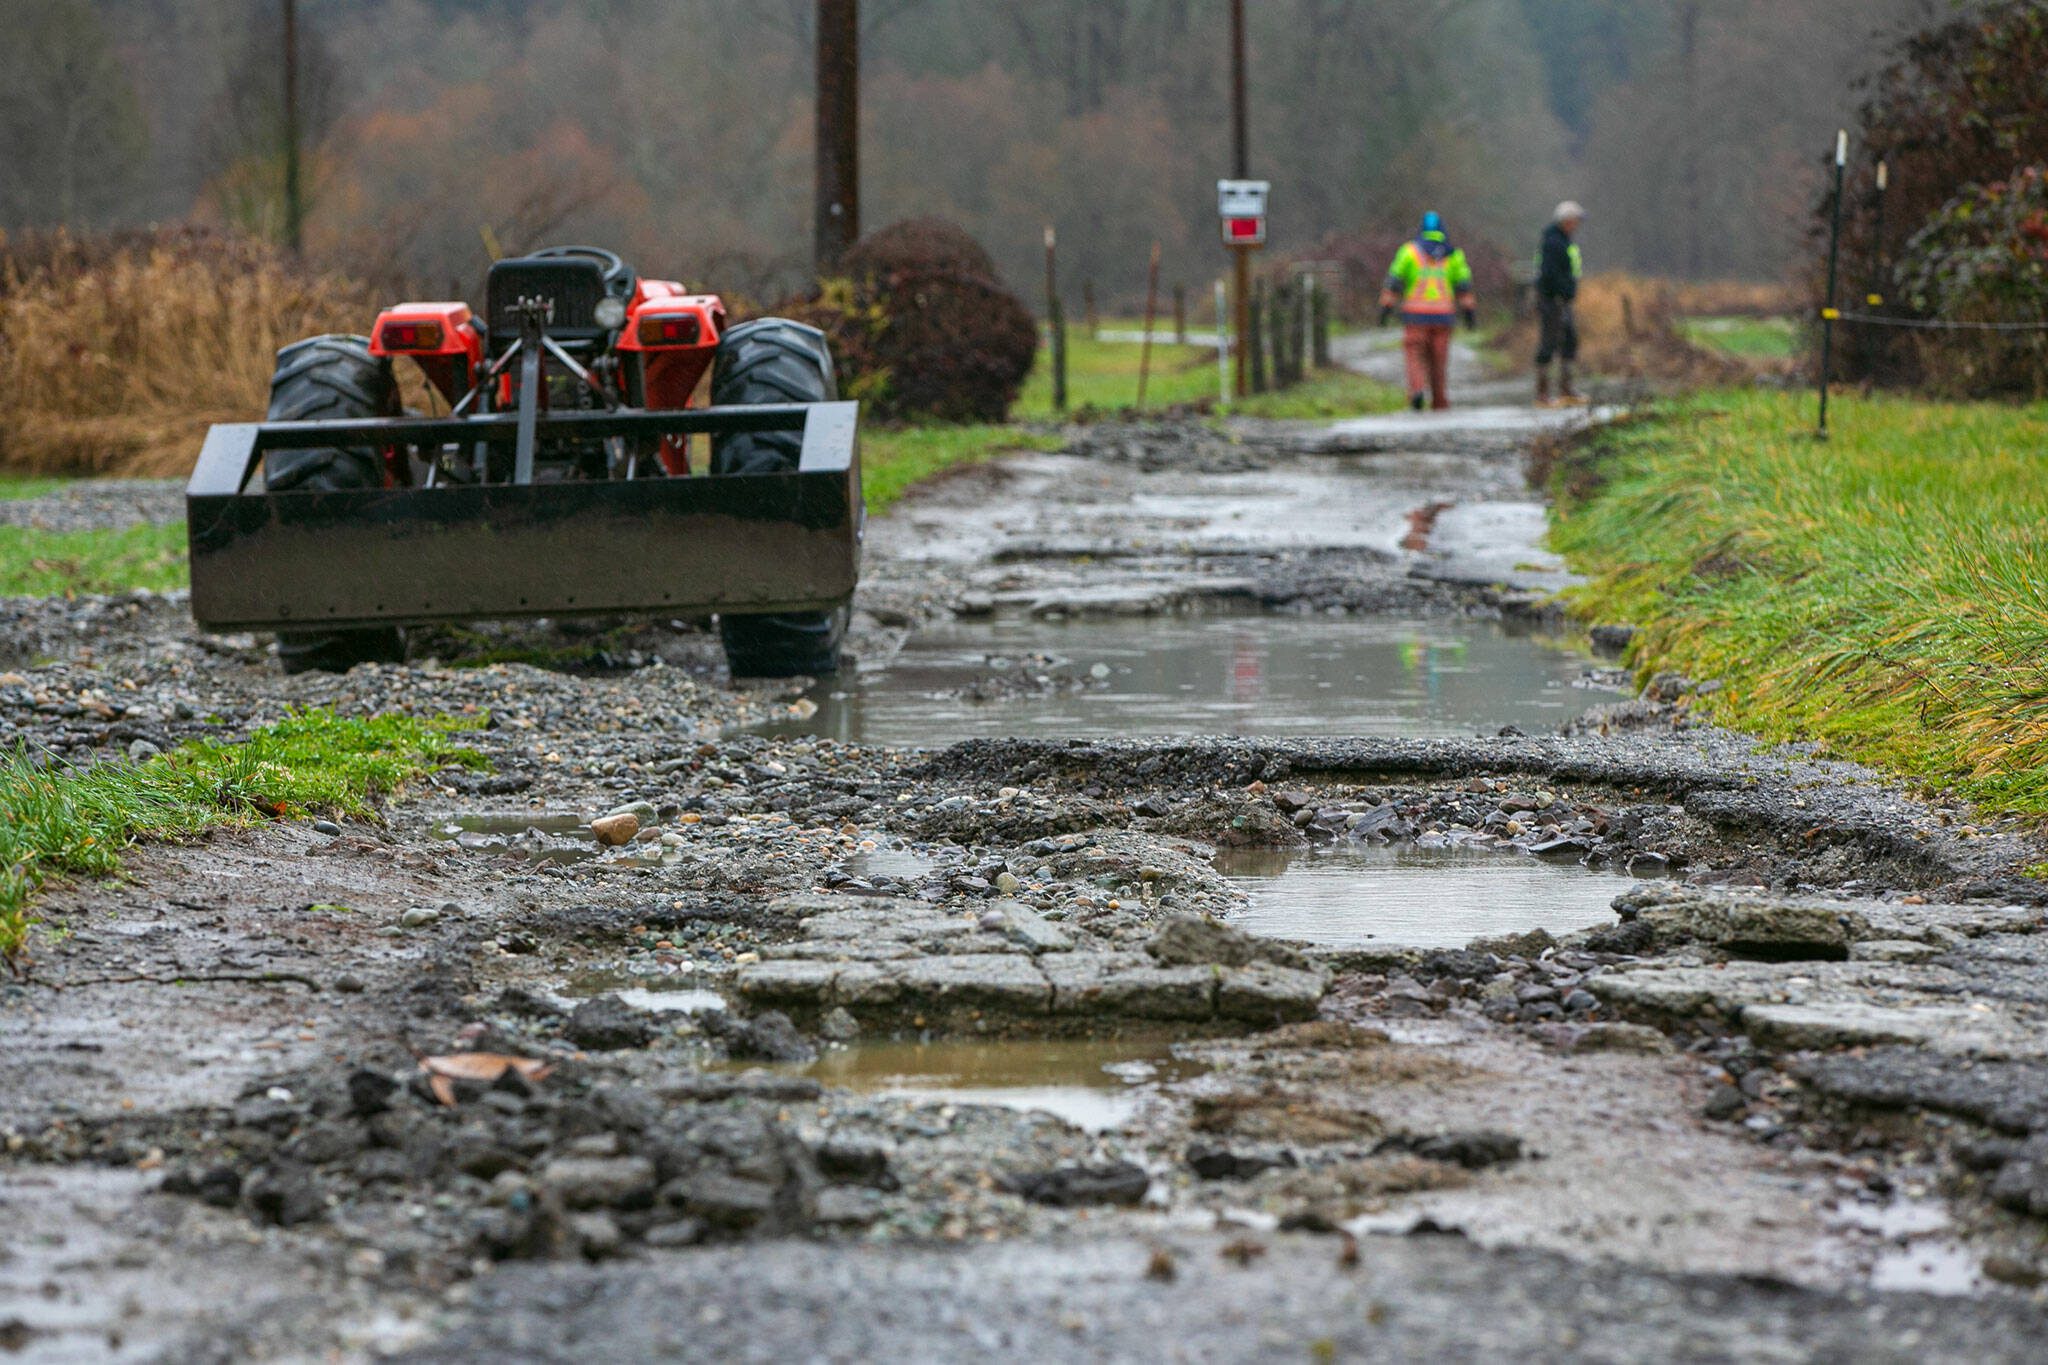 The drive up to Mary Fuentes’ farm is washed out and full of potholes on Thursday, Dec. 7, 2023, after extensive flooding from the Stillaguamish River in Silvana, Washington. Fuentes was unable to drive out of her property due to the damage, but is within walking distance of her brother’s house. (Ryan Berry / The Herald)